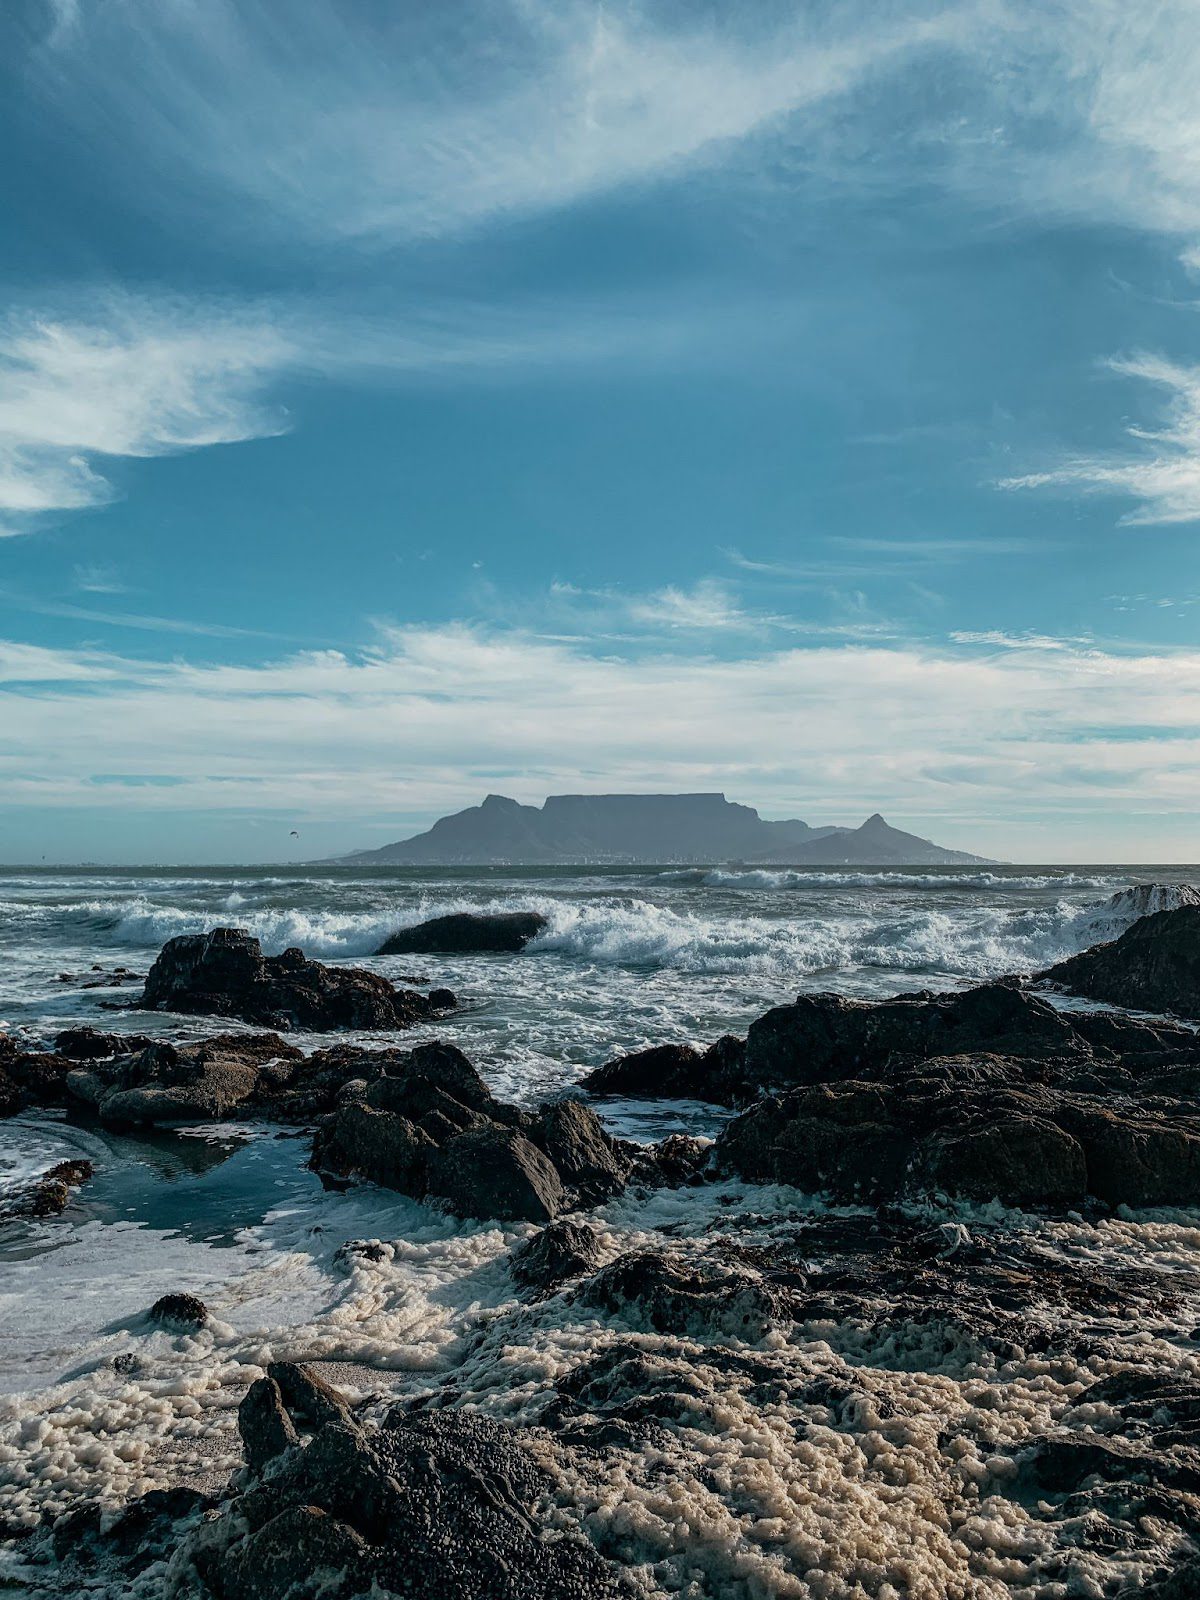 The breathtaking view of the famous Table Mountain from Blouberg Beach